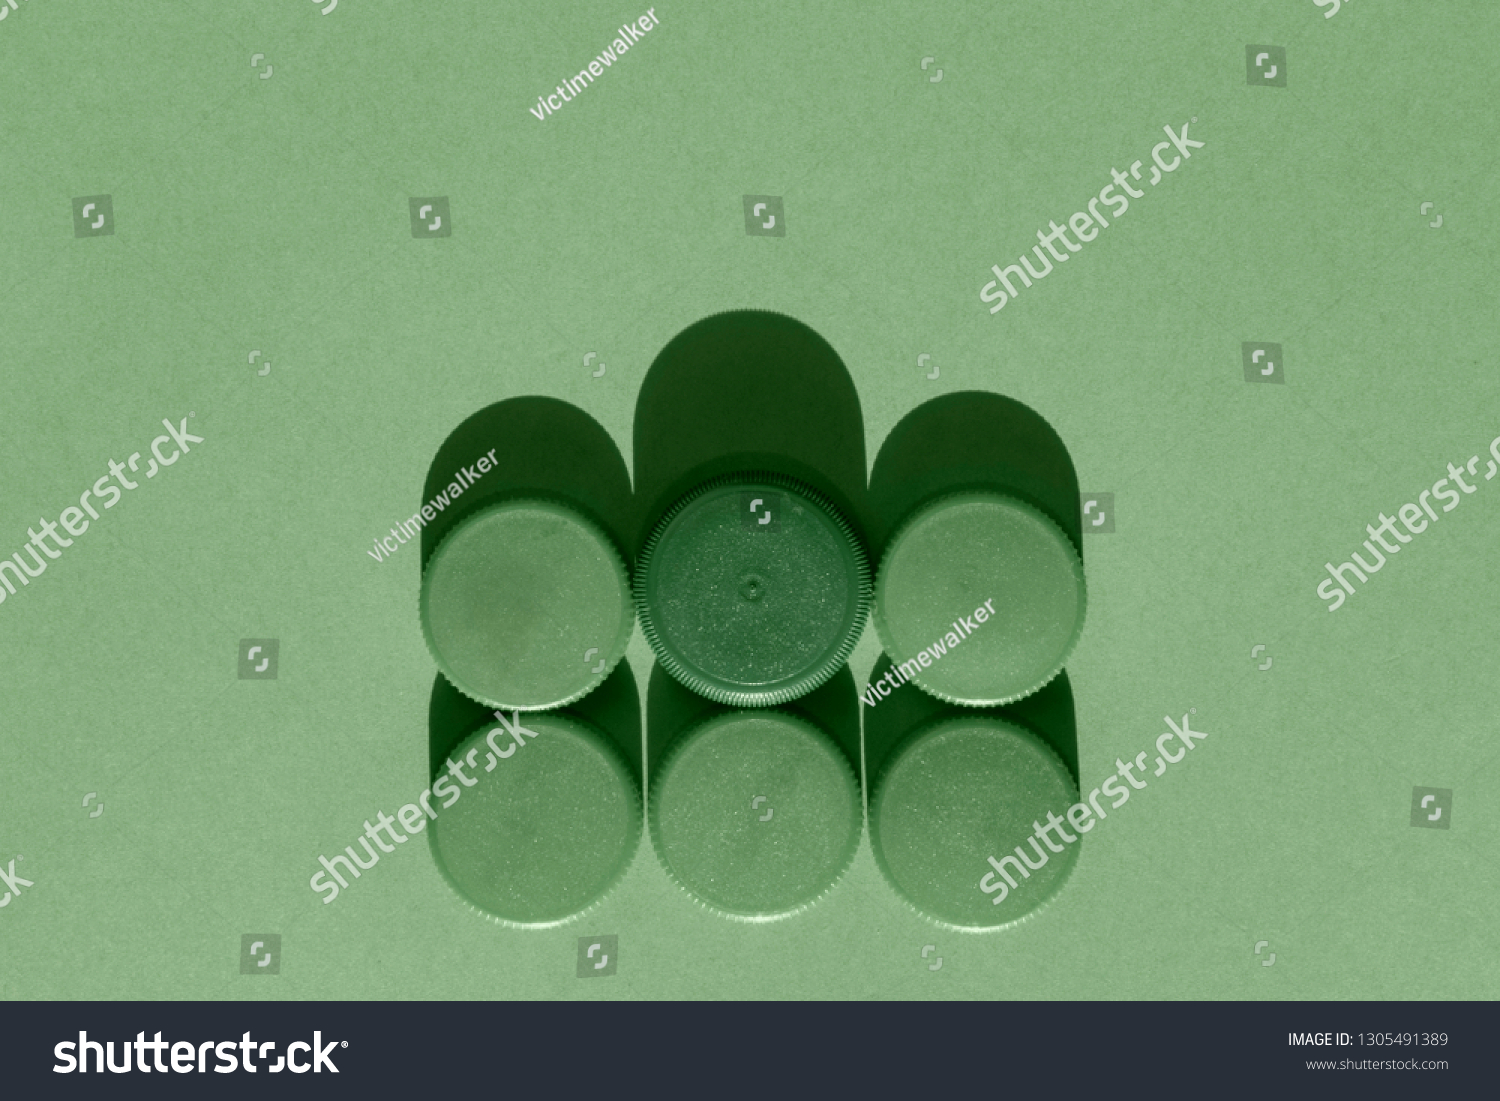 Six green plastic bottle caps on a green background, the round caps are in two rows , monochromatic effect #1305491389